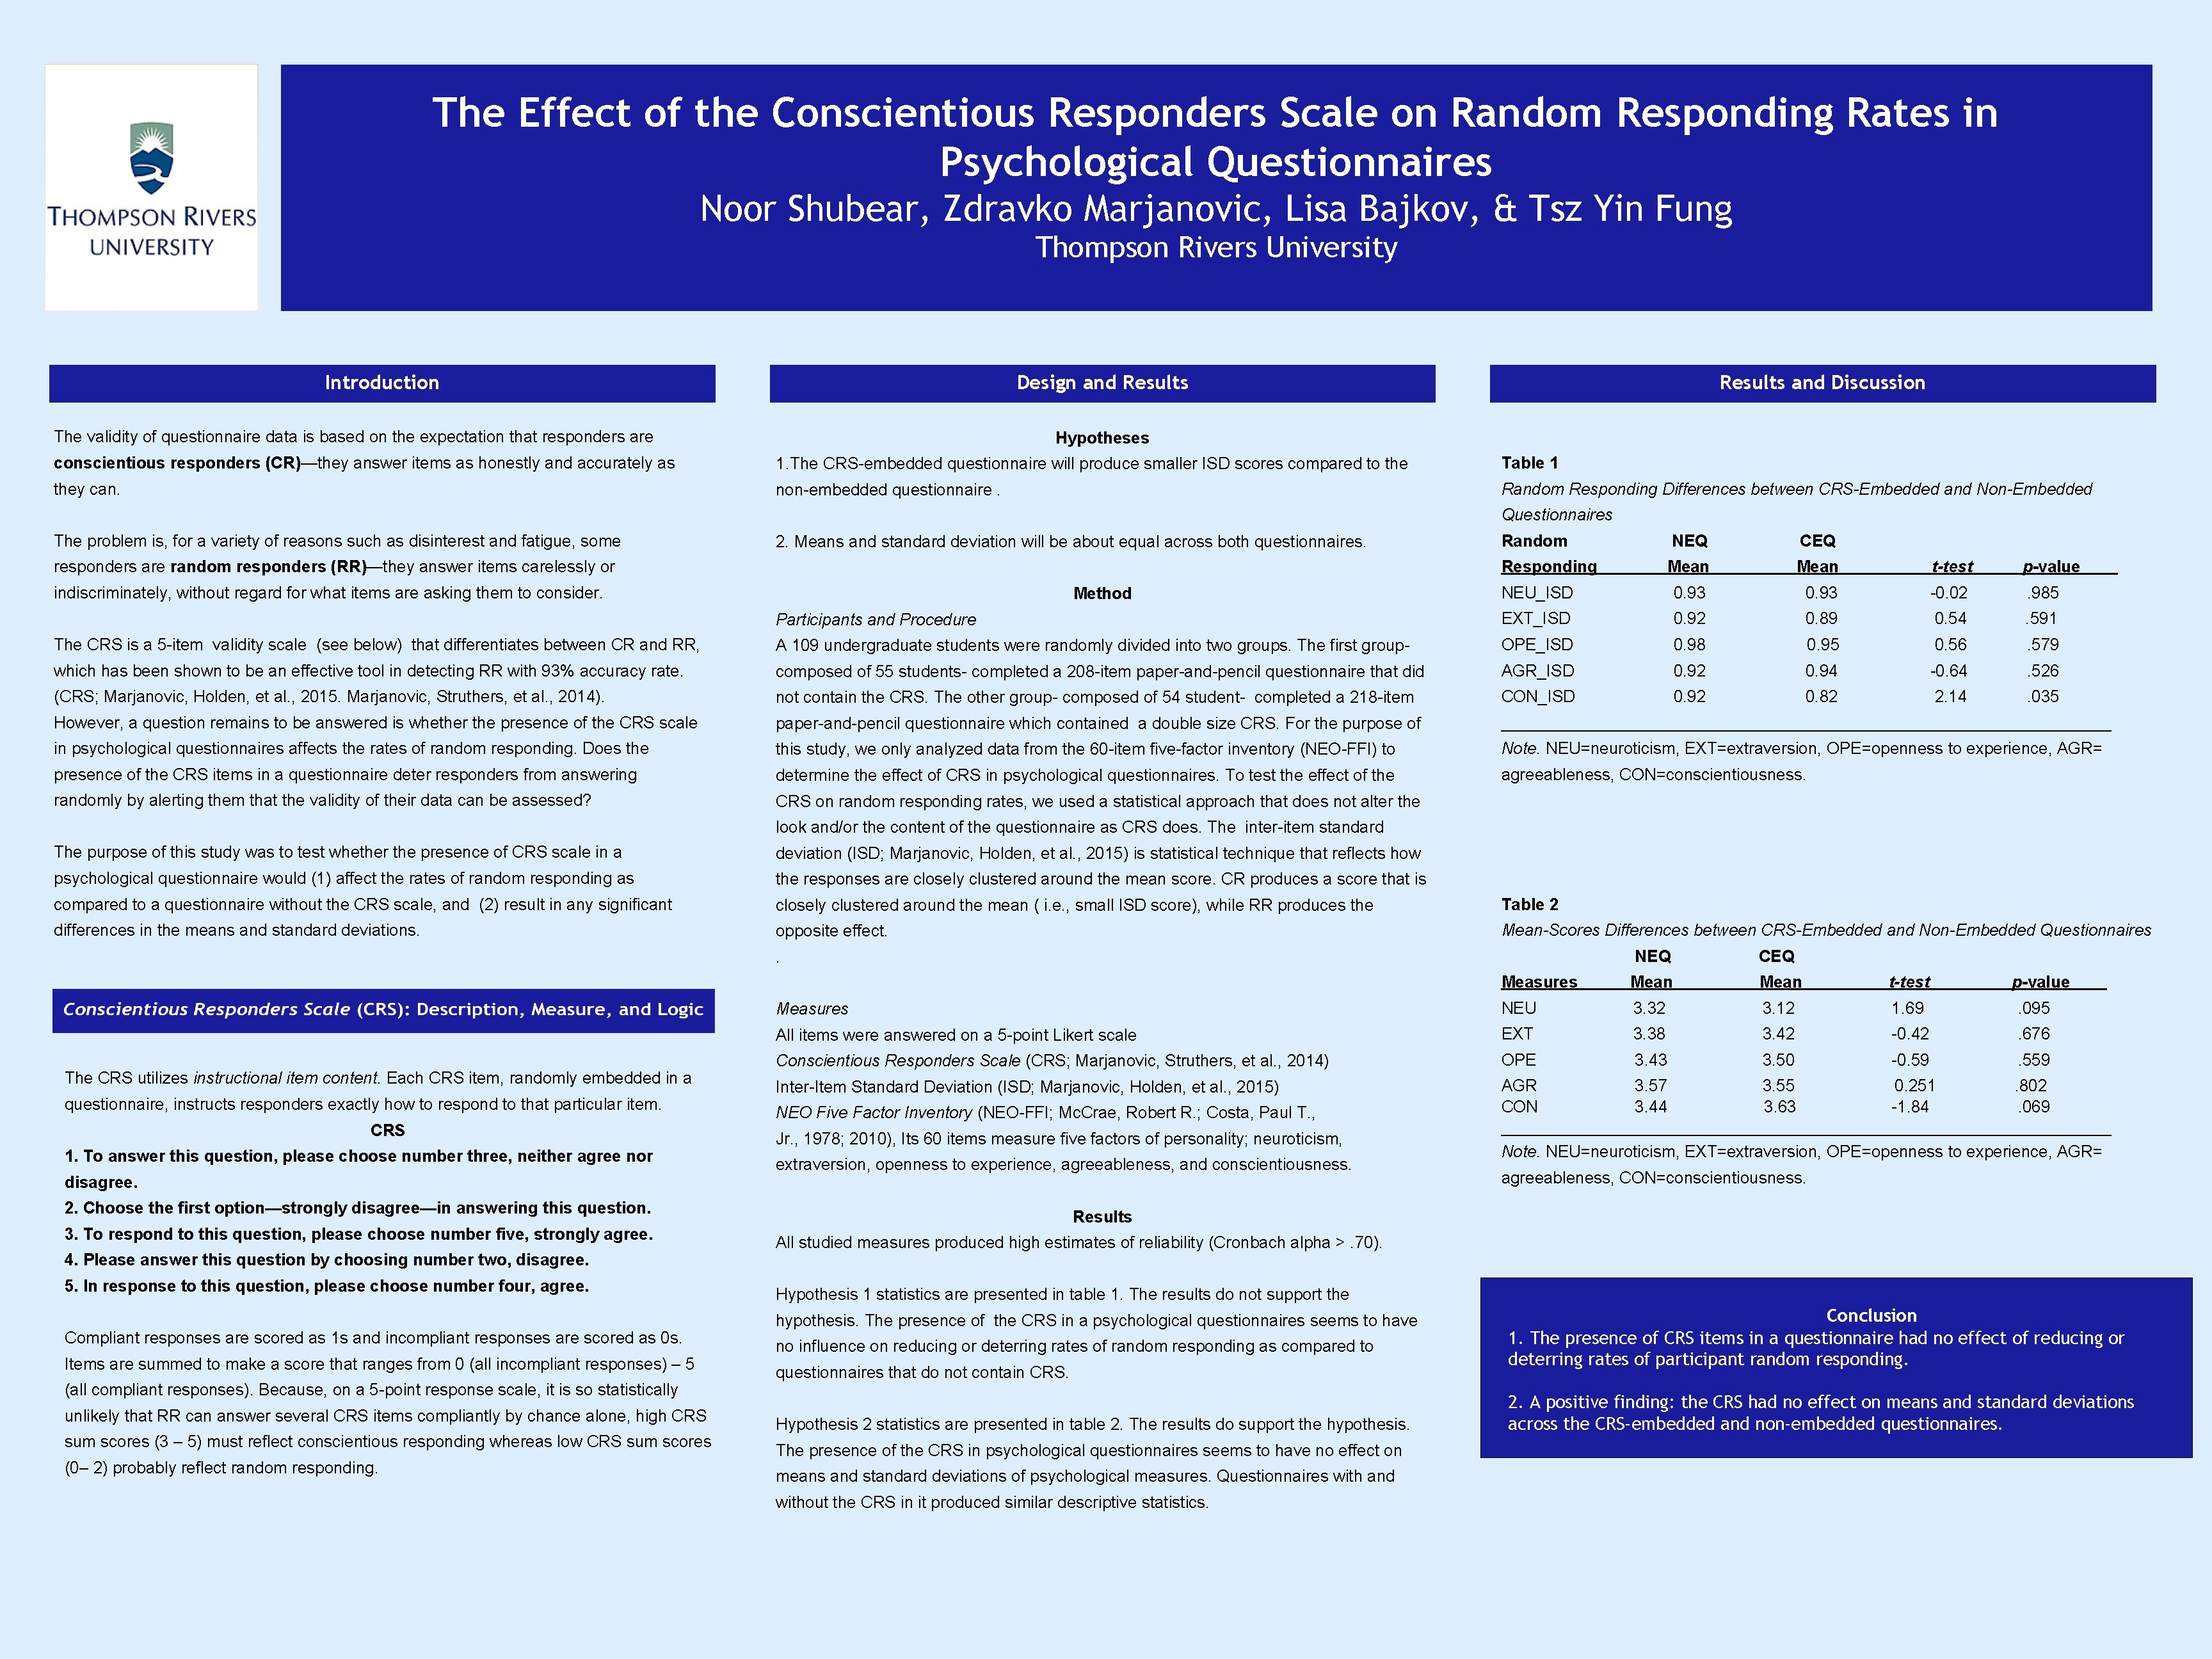 The Effect of the Conscientious Responders Scale on Random Responding Rates in Psychological Questionnaires